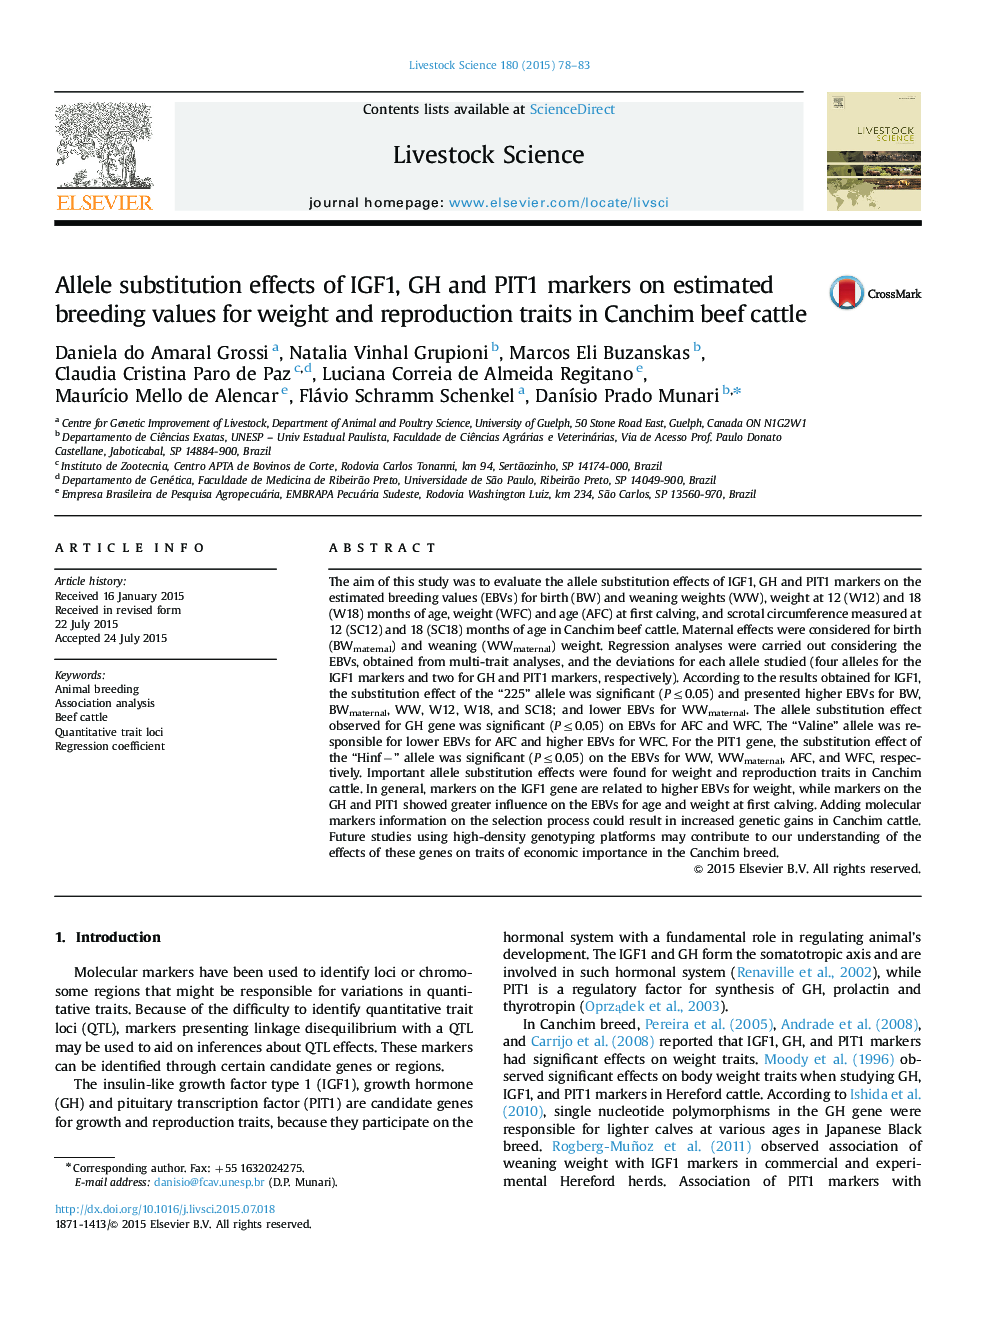 Allele substitution effects of IGF1, GH and PIT1 markers on estimated breeding values for weight and reproduction traits in Canchim beef cattle